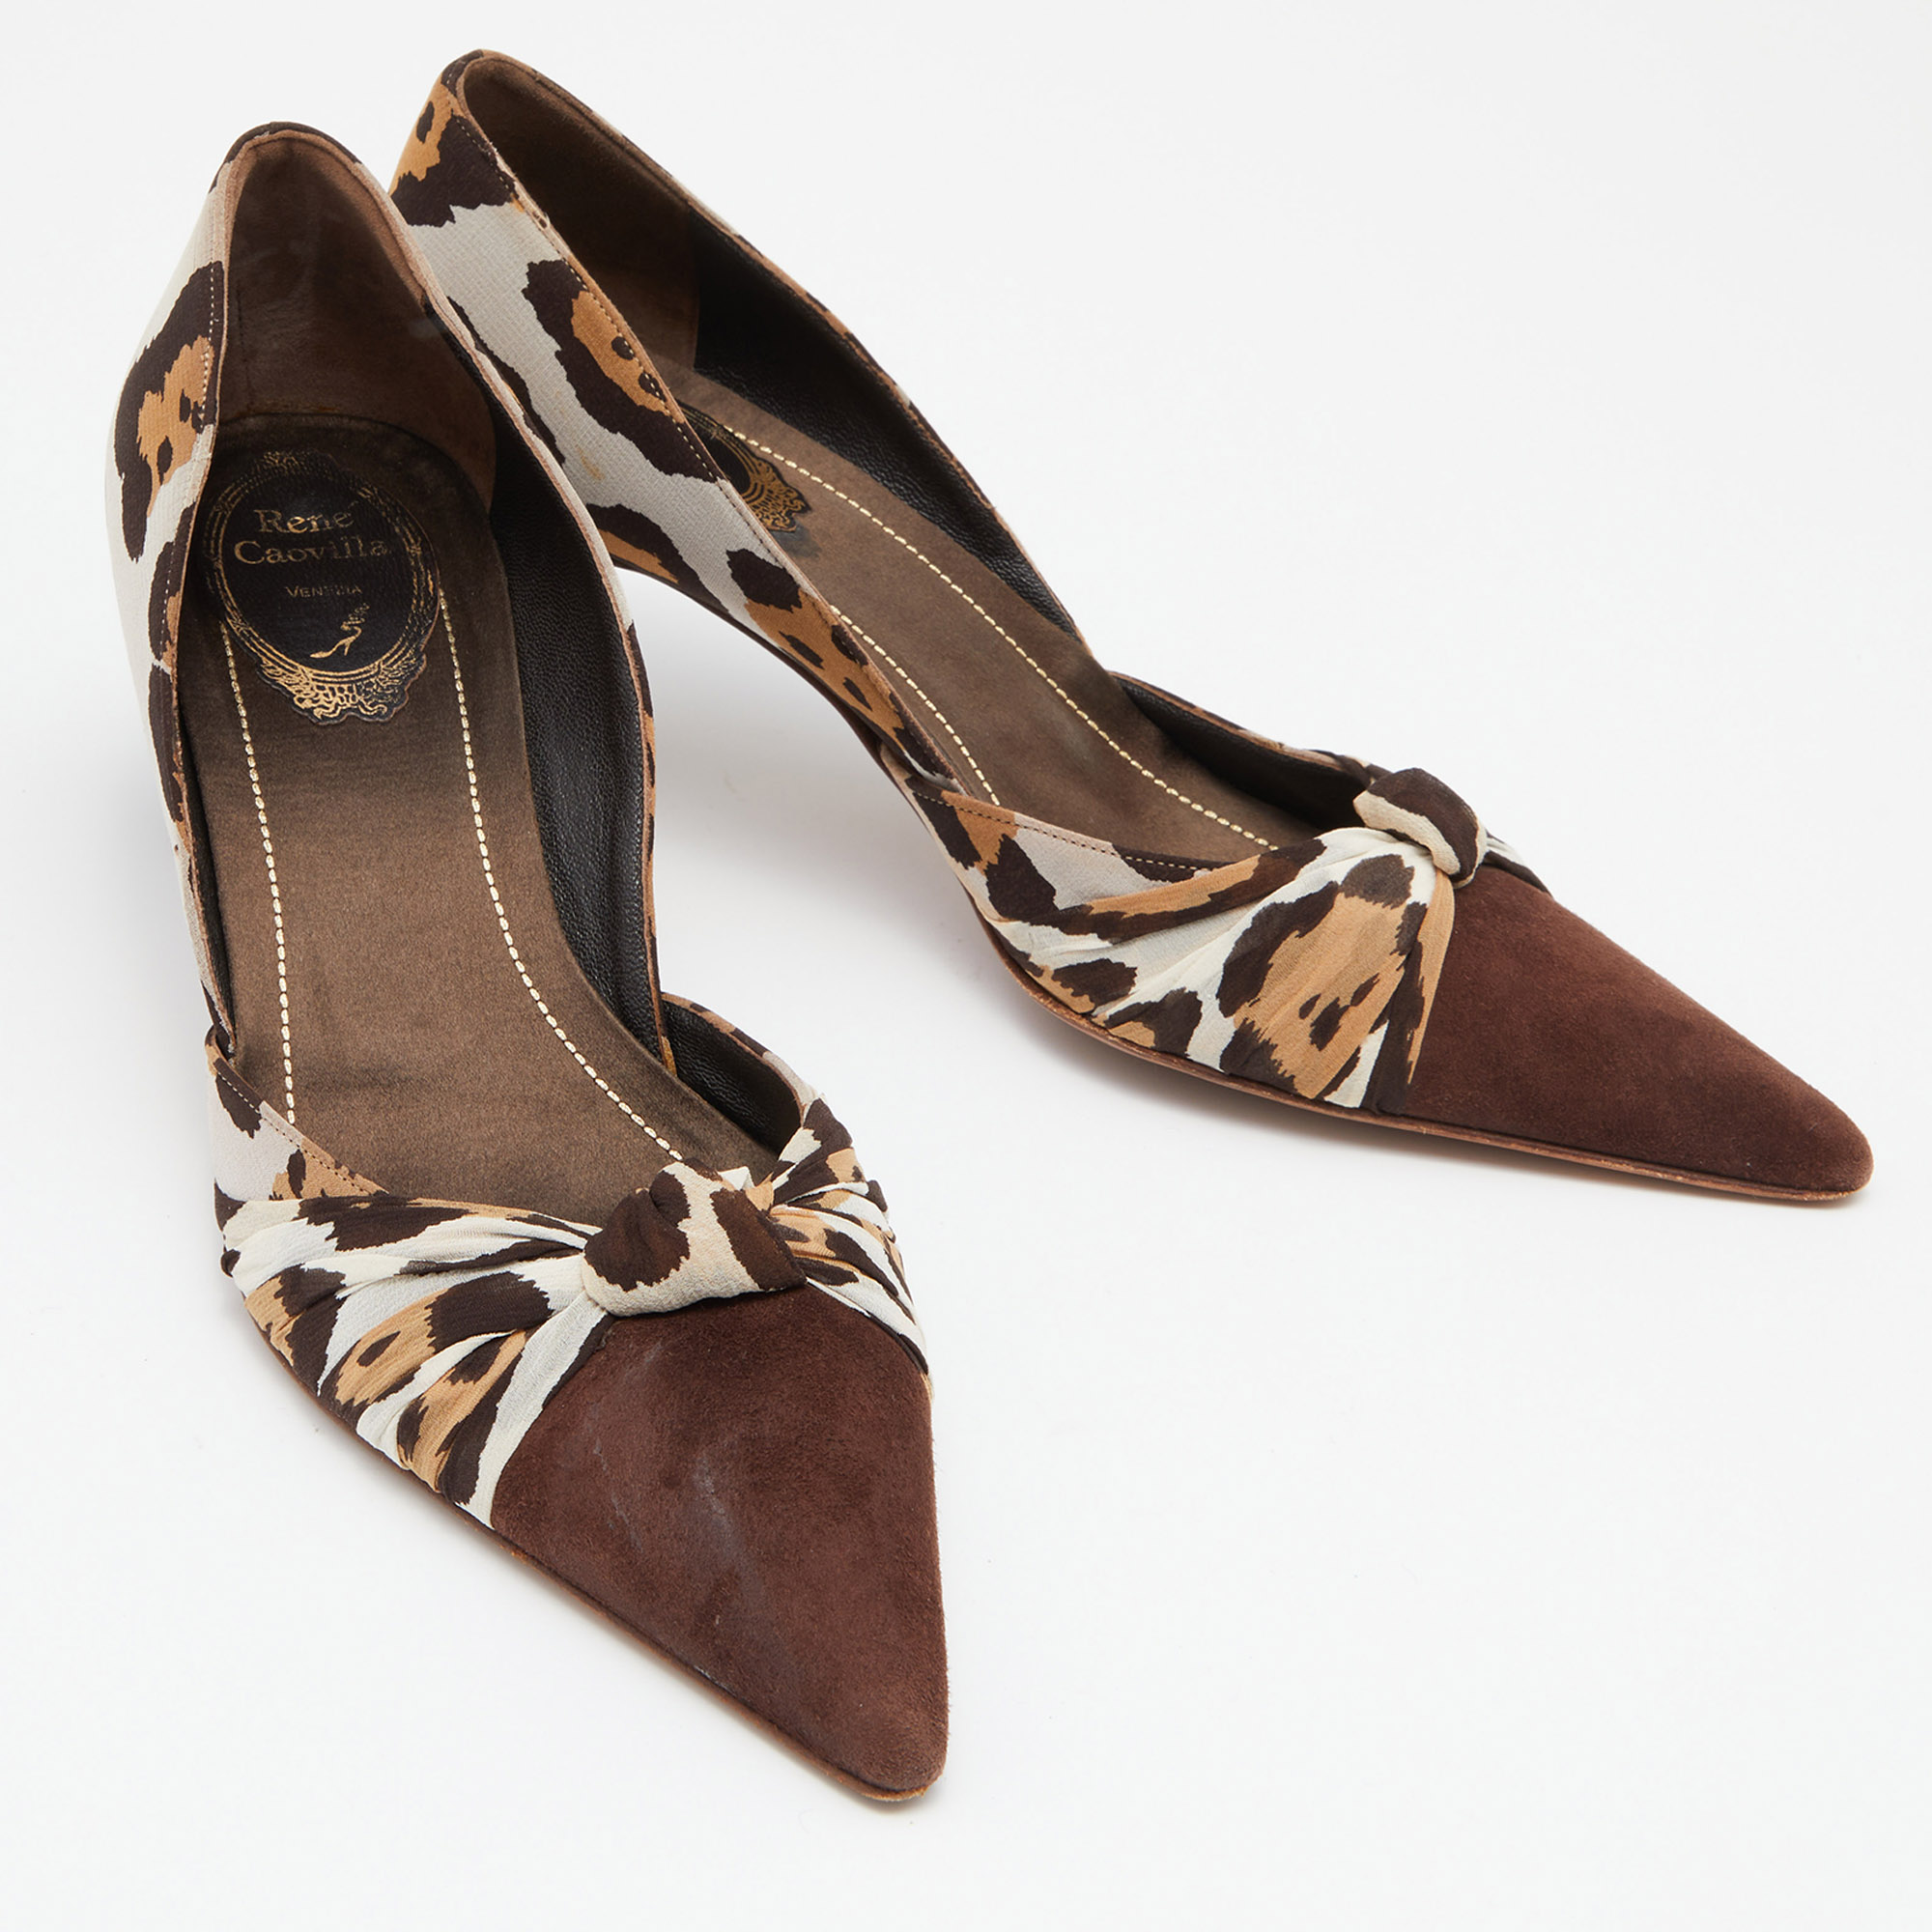 René Caovilla Brown Leopard Print Fabric And Suede Knotted Pointed Toe Pumps Size 38